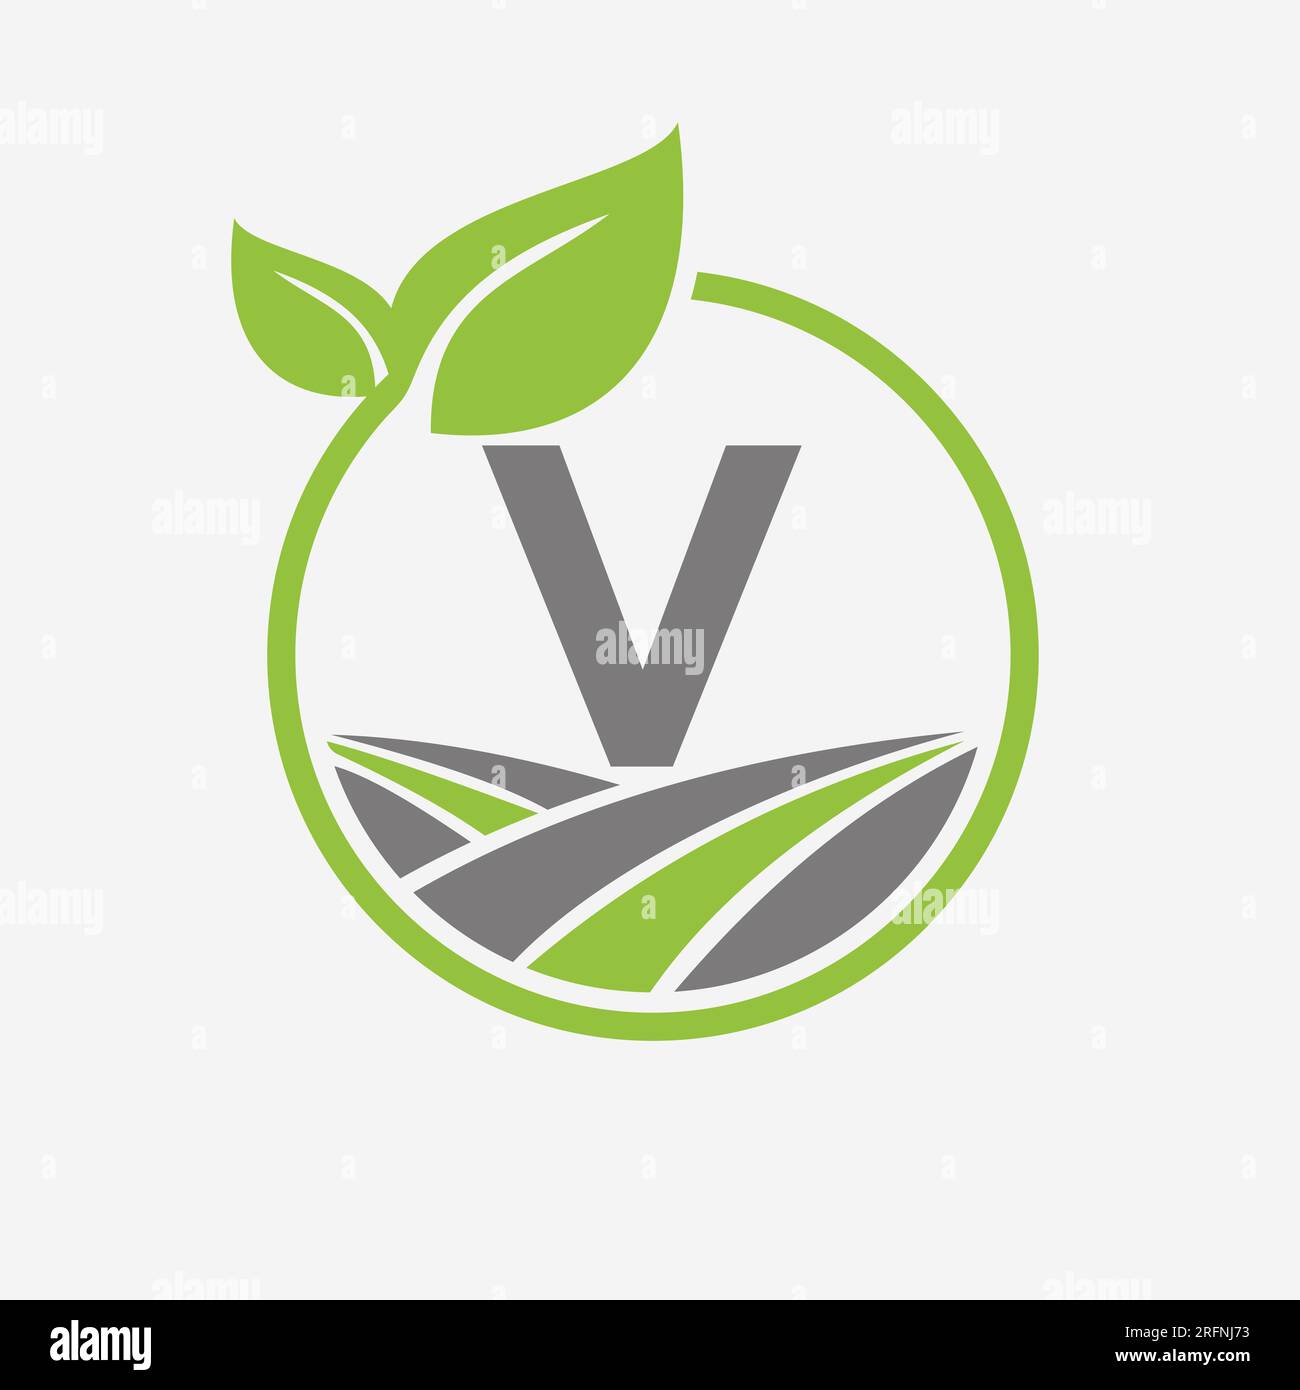 Agriculture Logo On Letter V With Leaf and Field Symbol. Farming ...